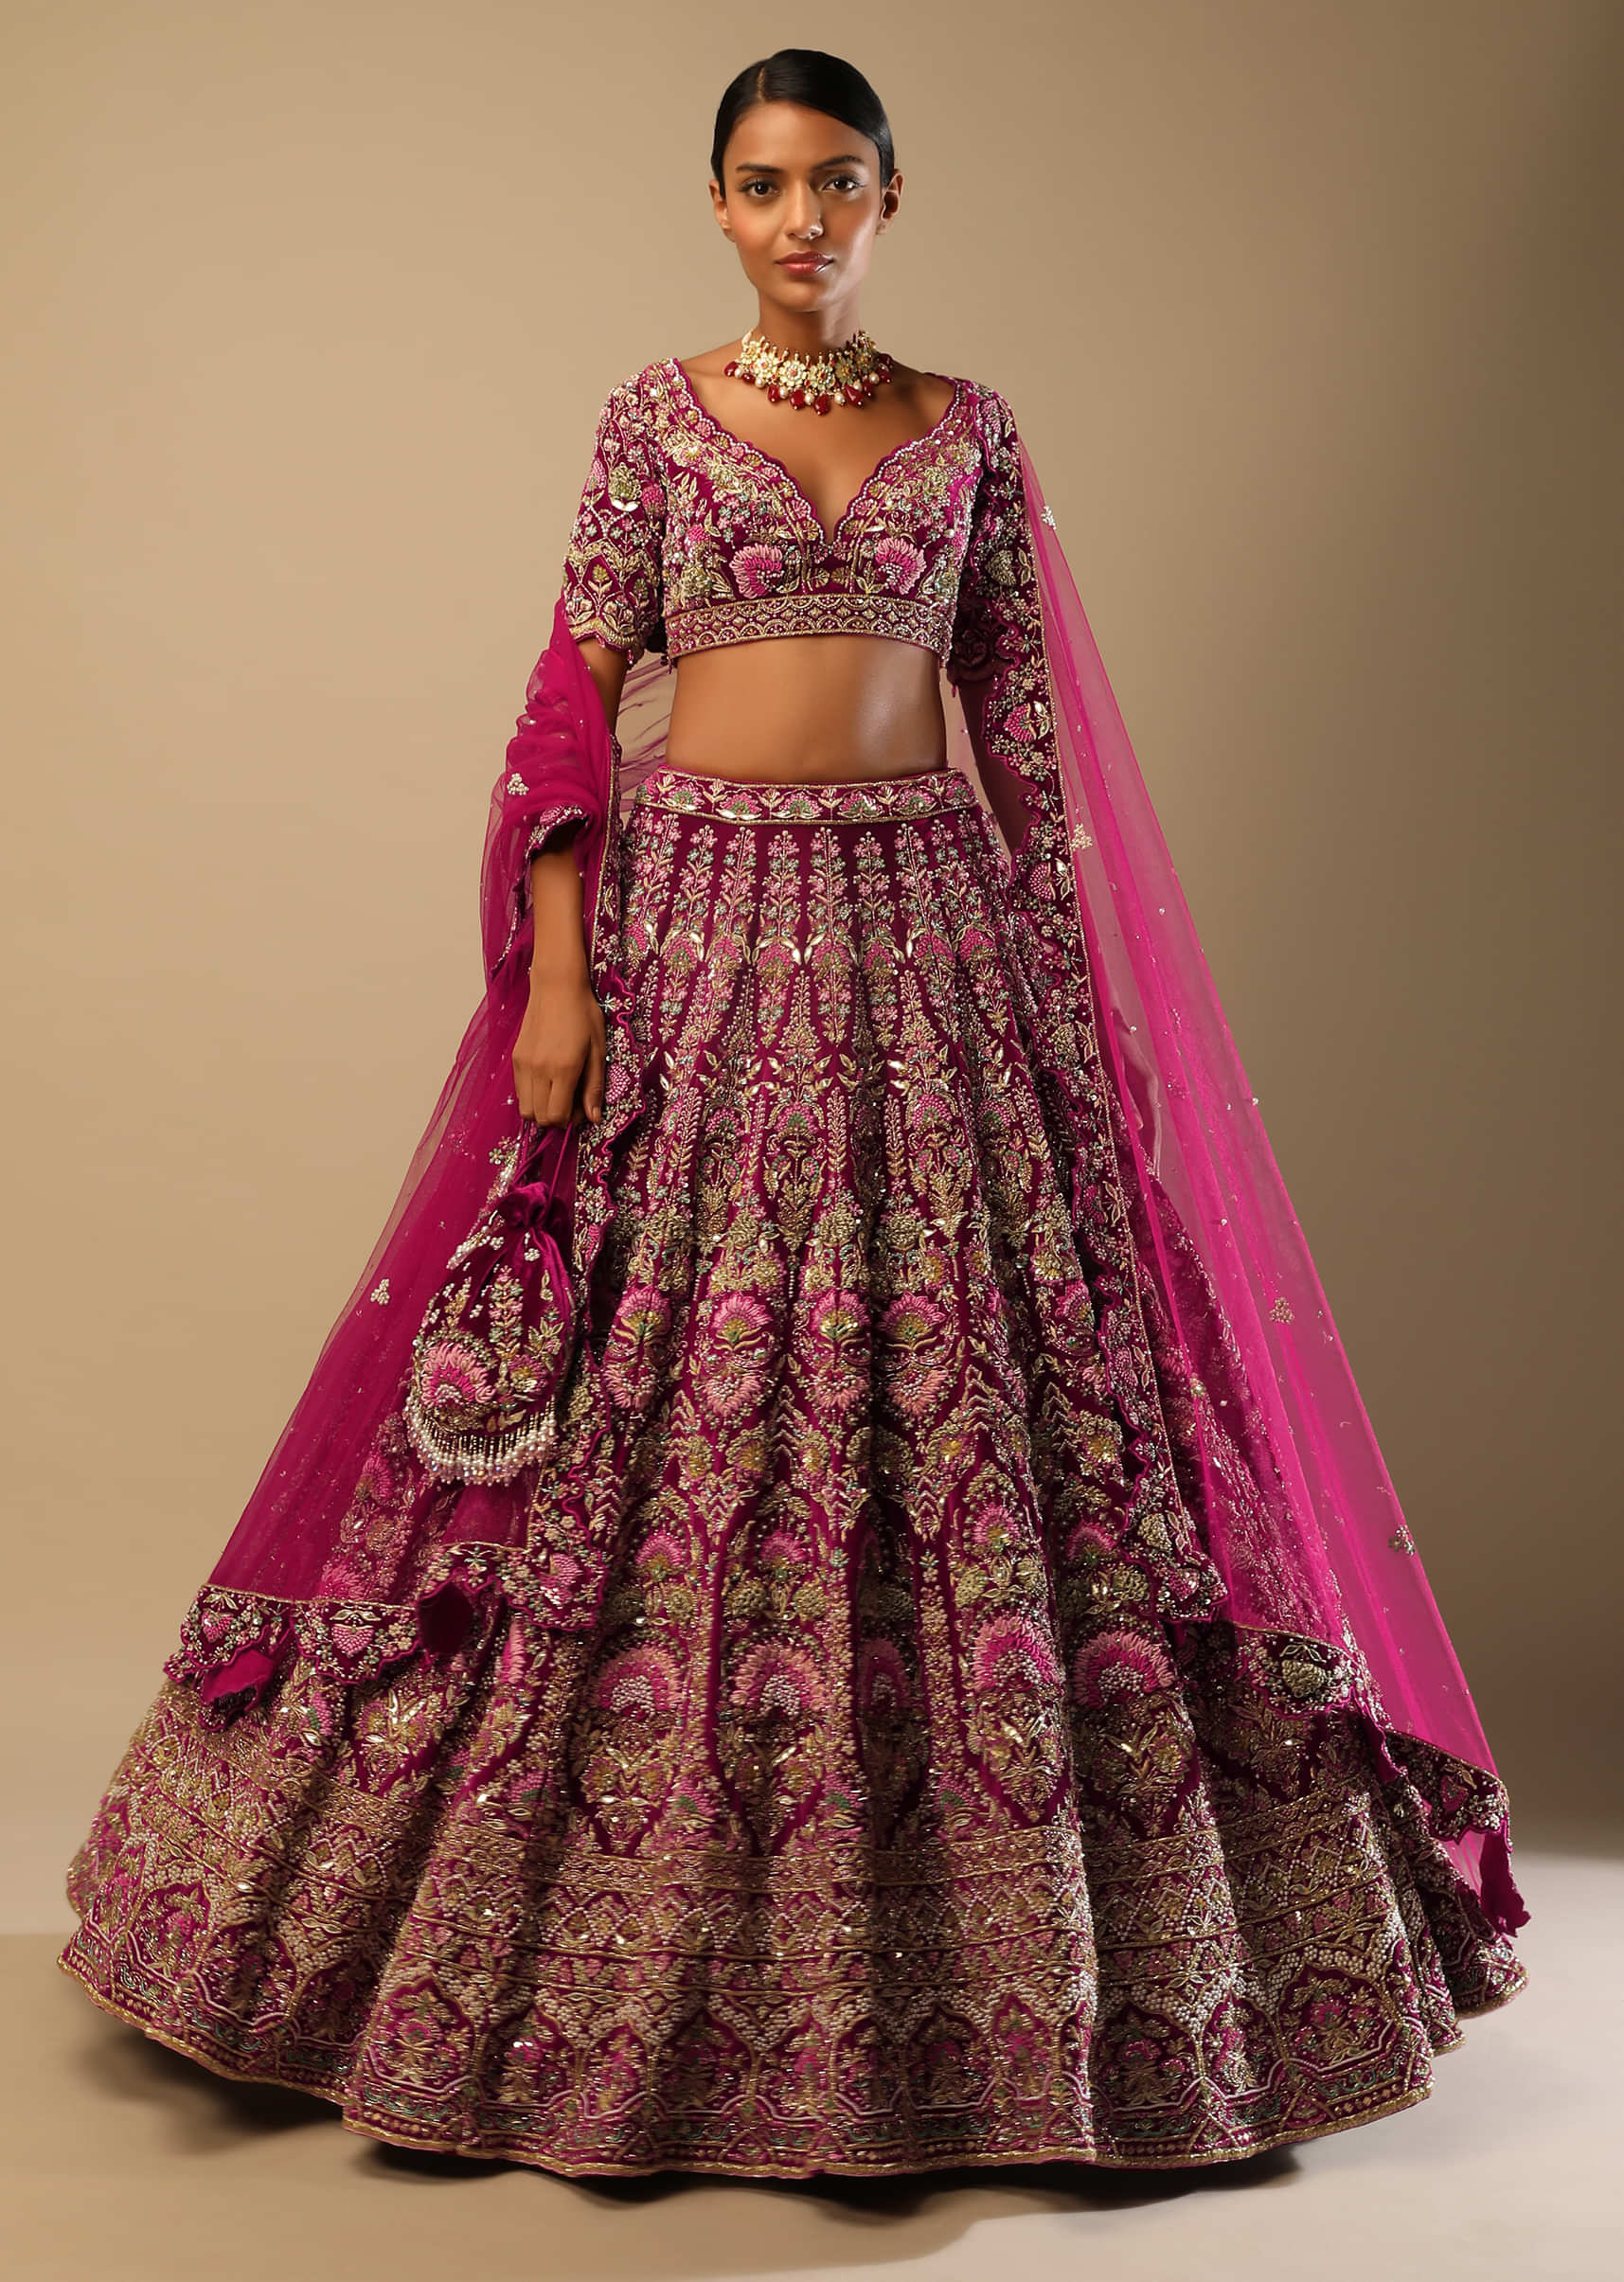 Sangria Velvet Lehenga Choli With Mughal Inspired Hand Embroidered Kalis Using Multi Colored Accents 